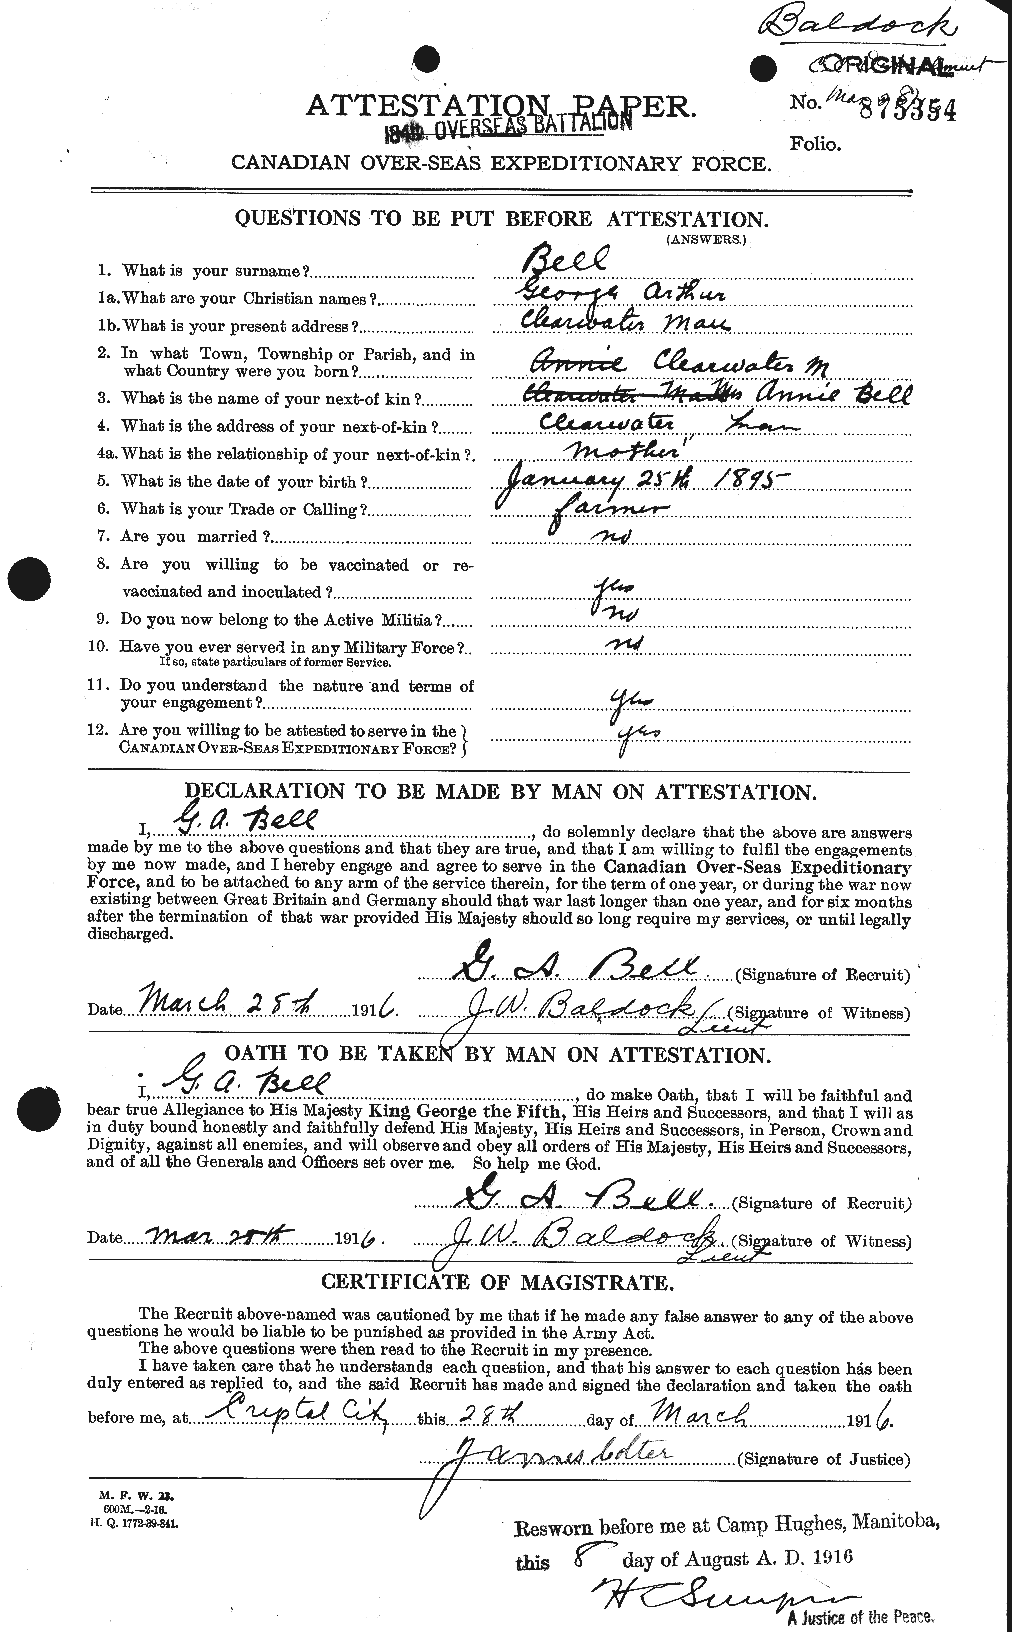 Personnel Records of the First World War - CEF 234168a